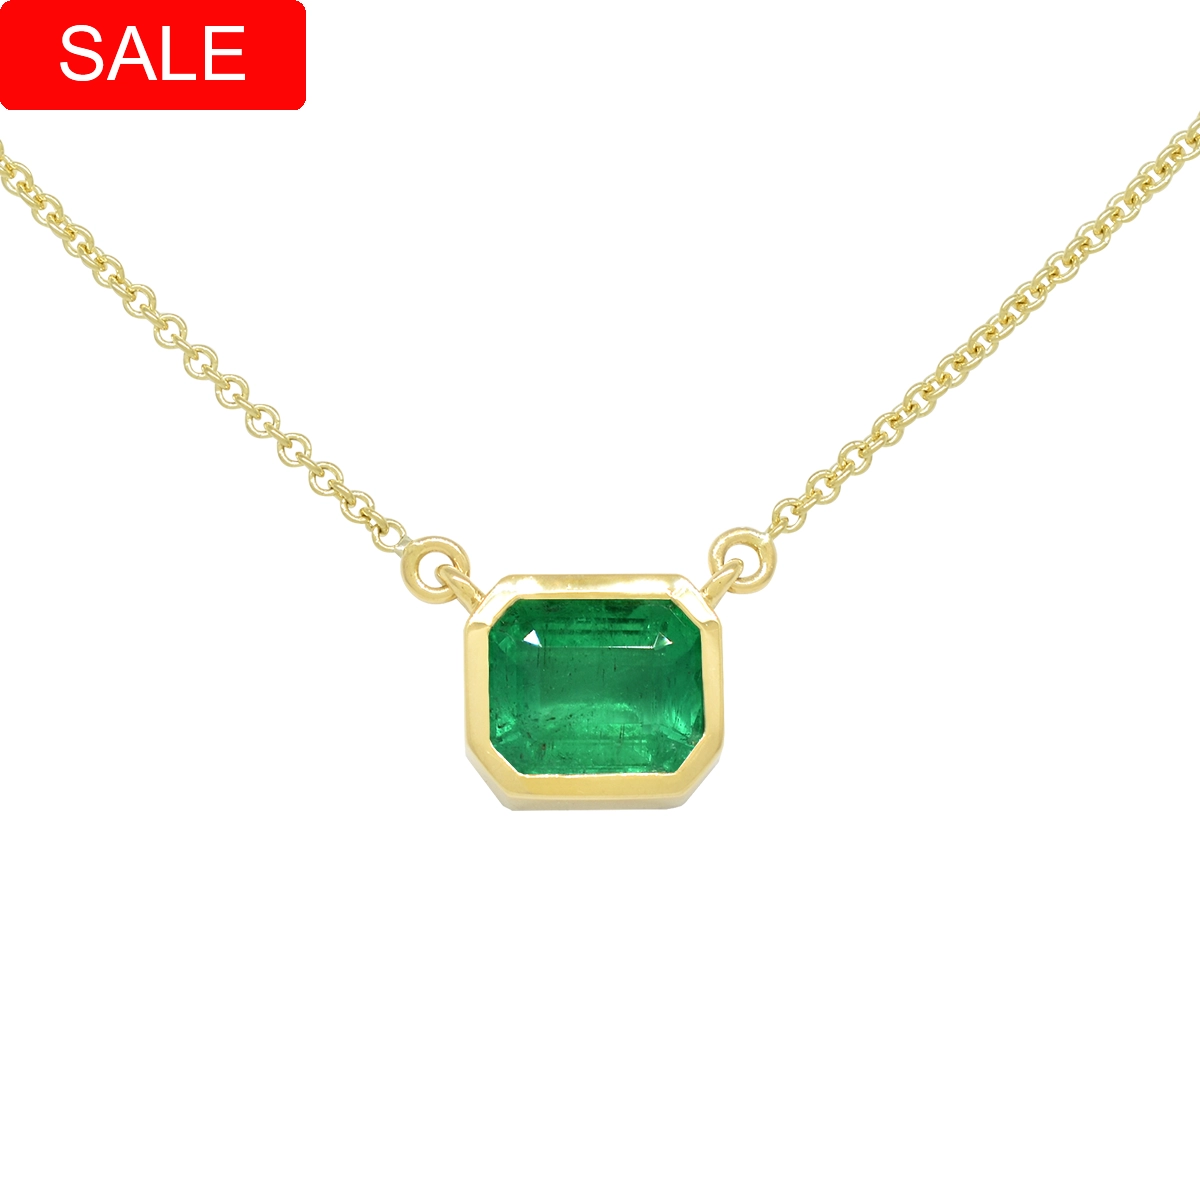 Emerald cut natural Colombian emerald set in 18K yellow gold classic bezel setting style